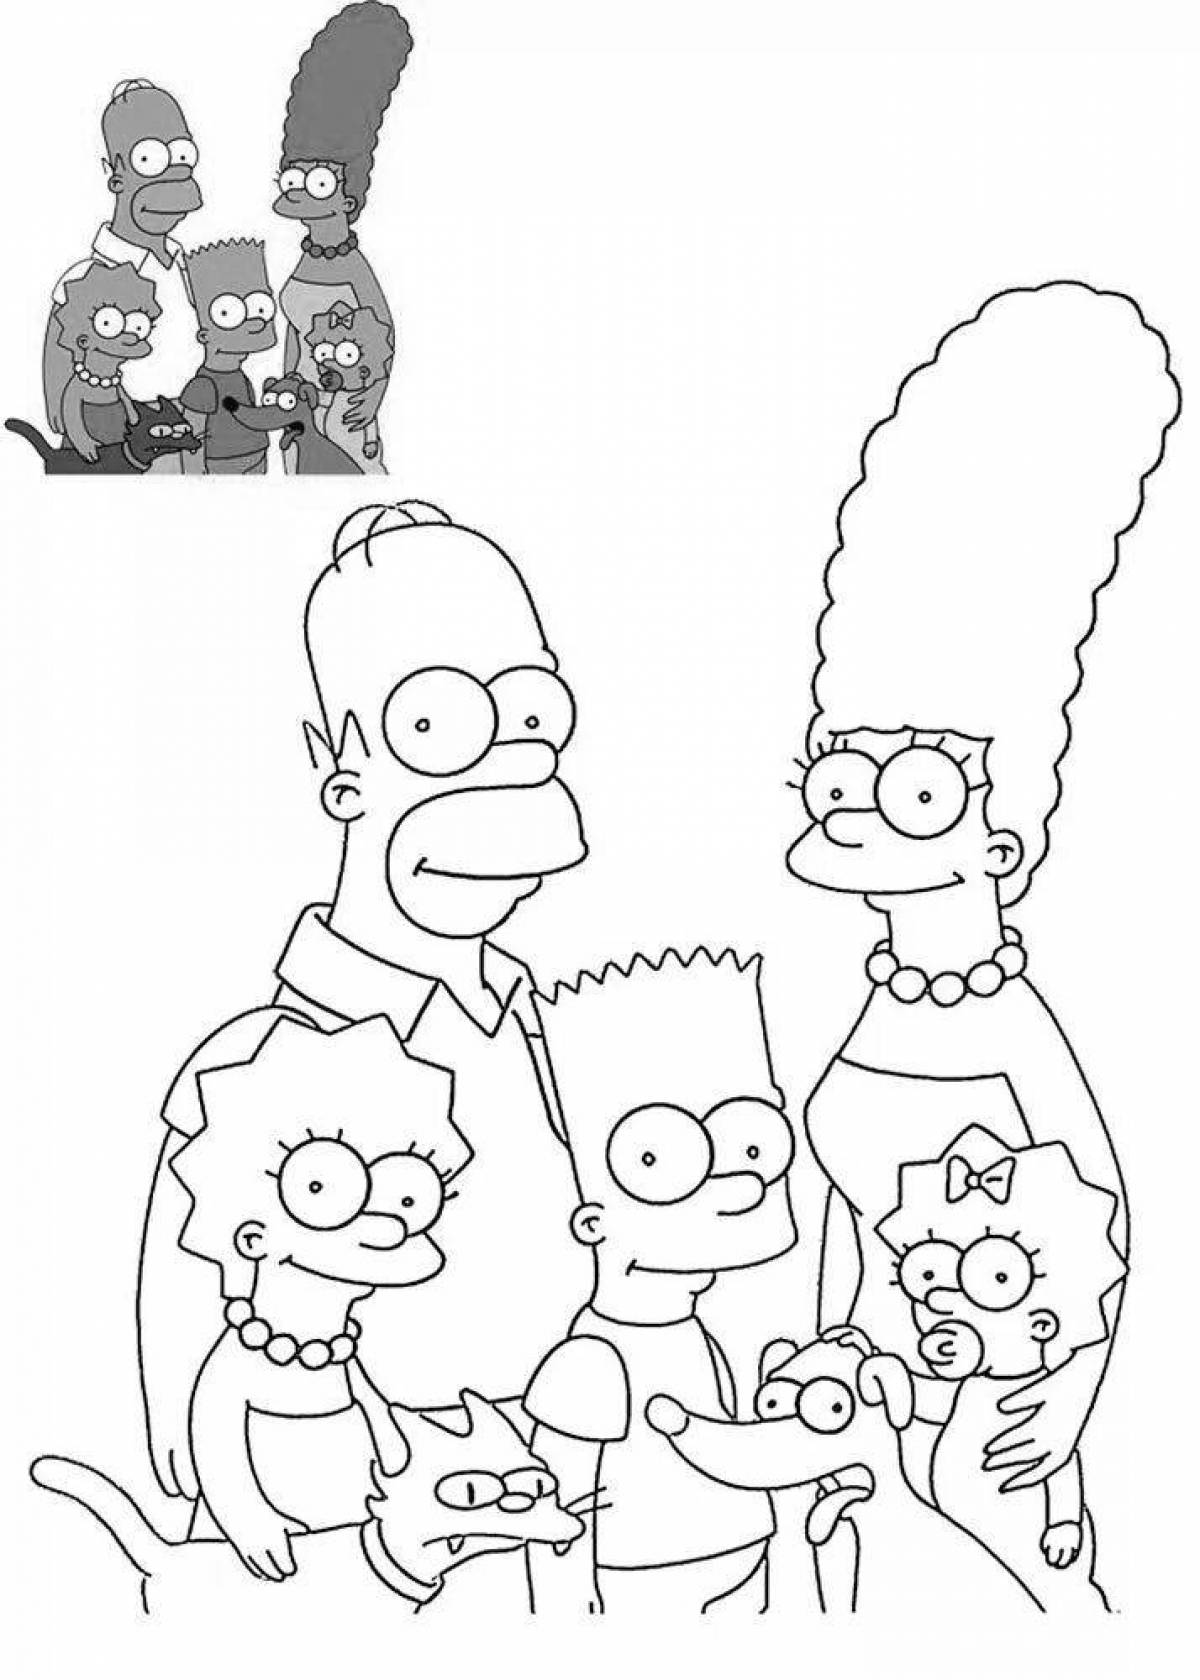 Exquisite simpsons coloring by number